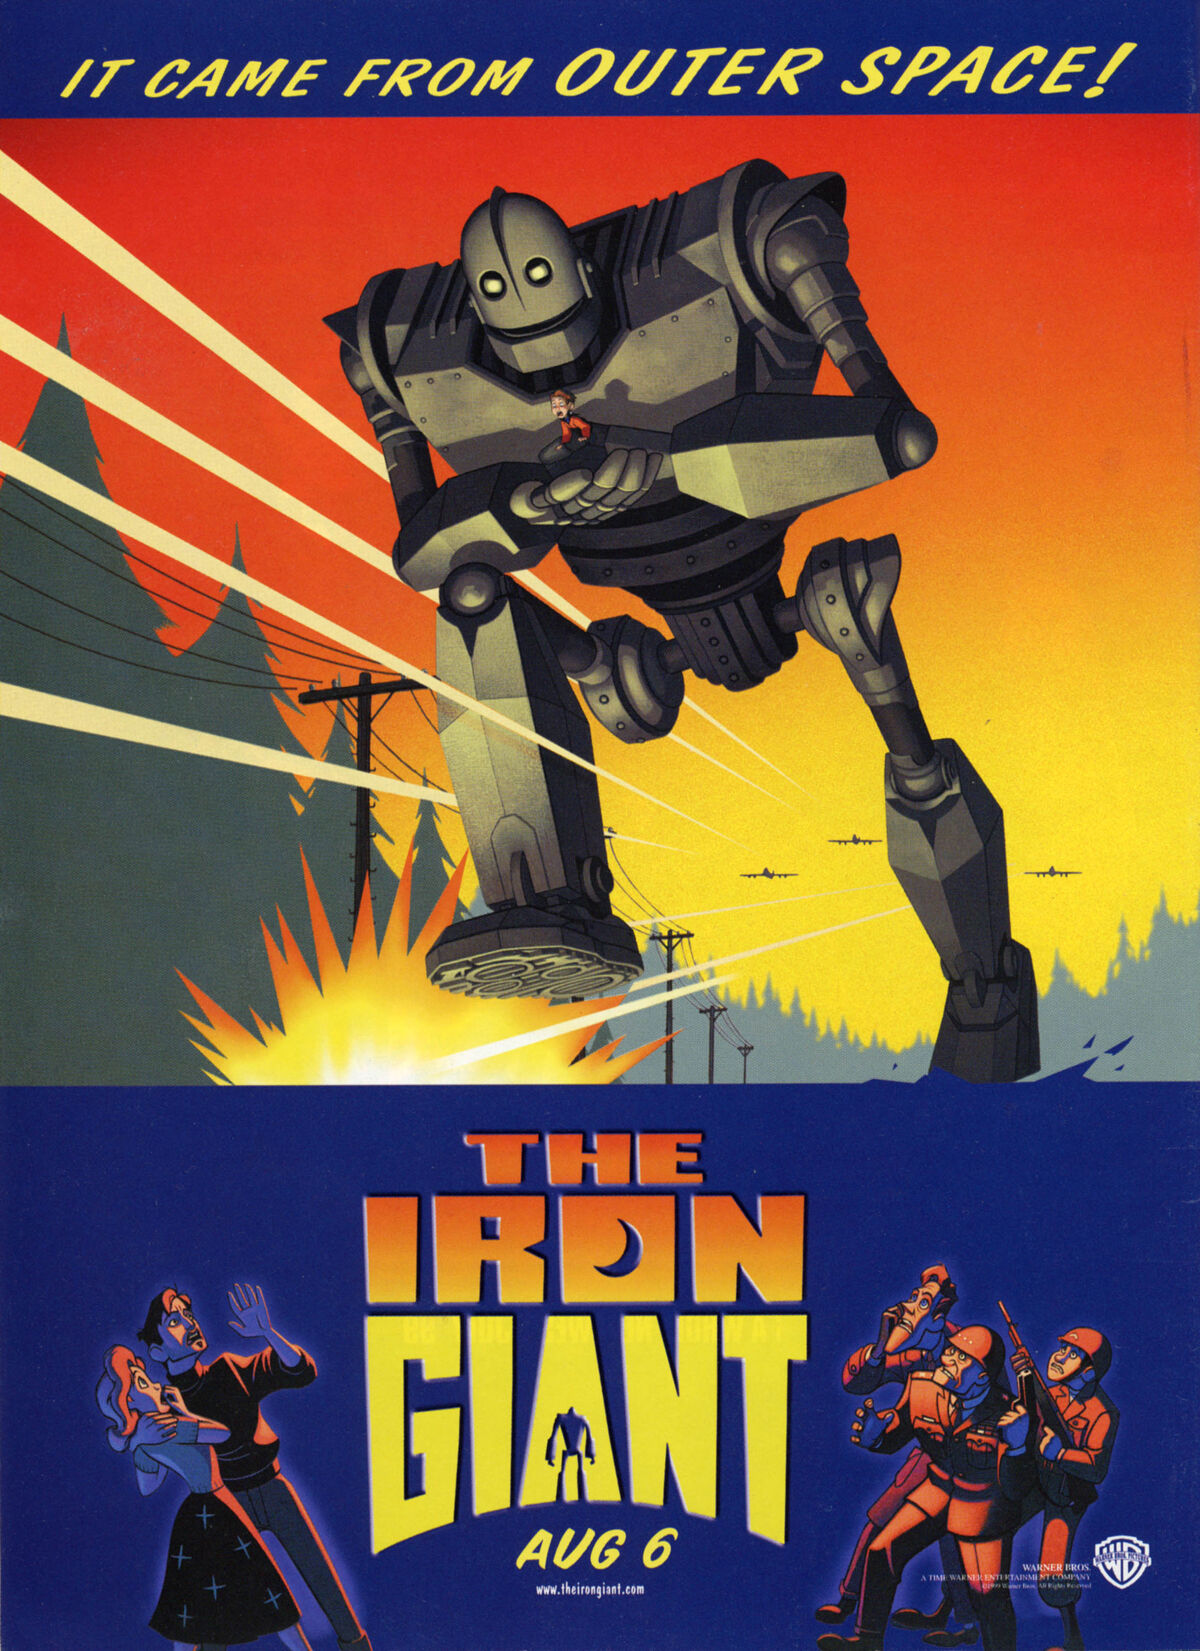 The Iron Giant Warner Bros pic